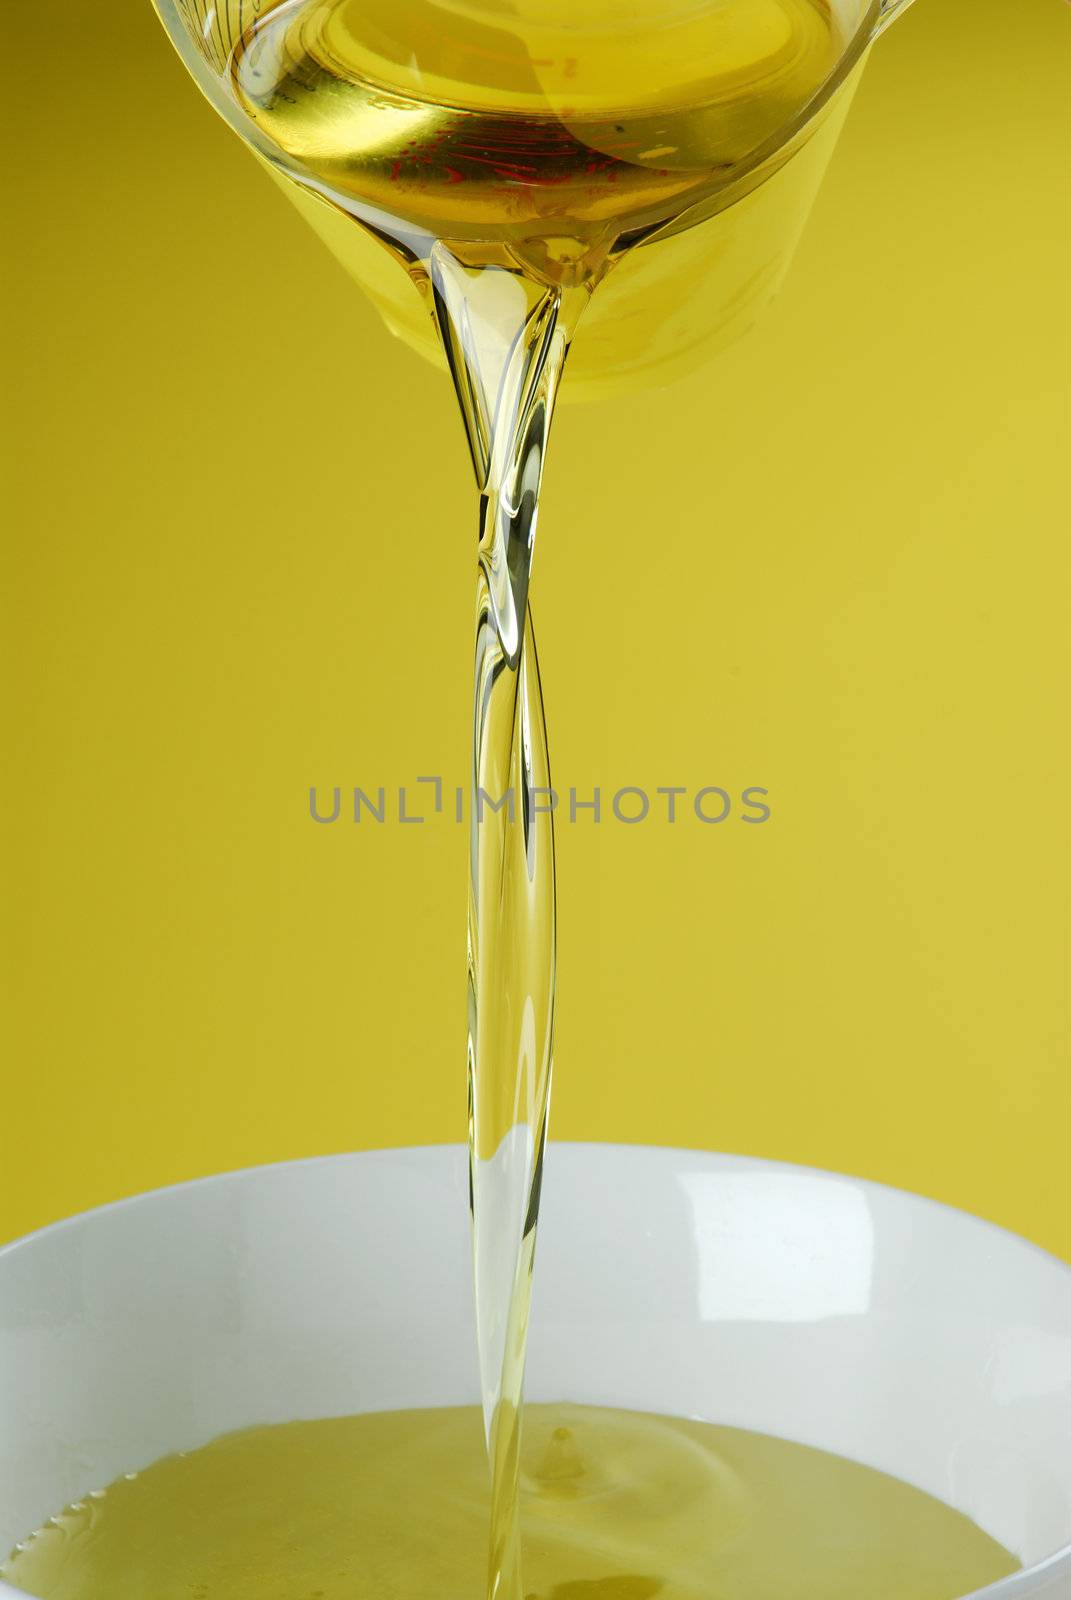 Pouring oil or golden liquid on yellow background